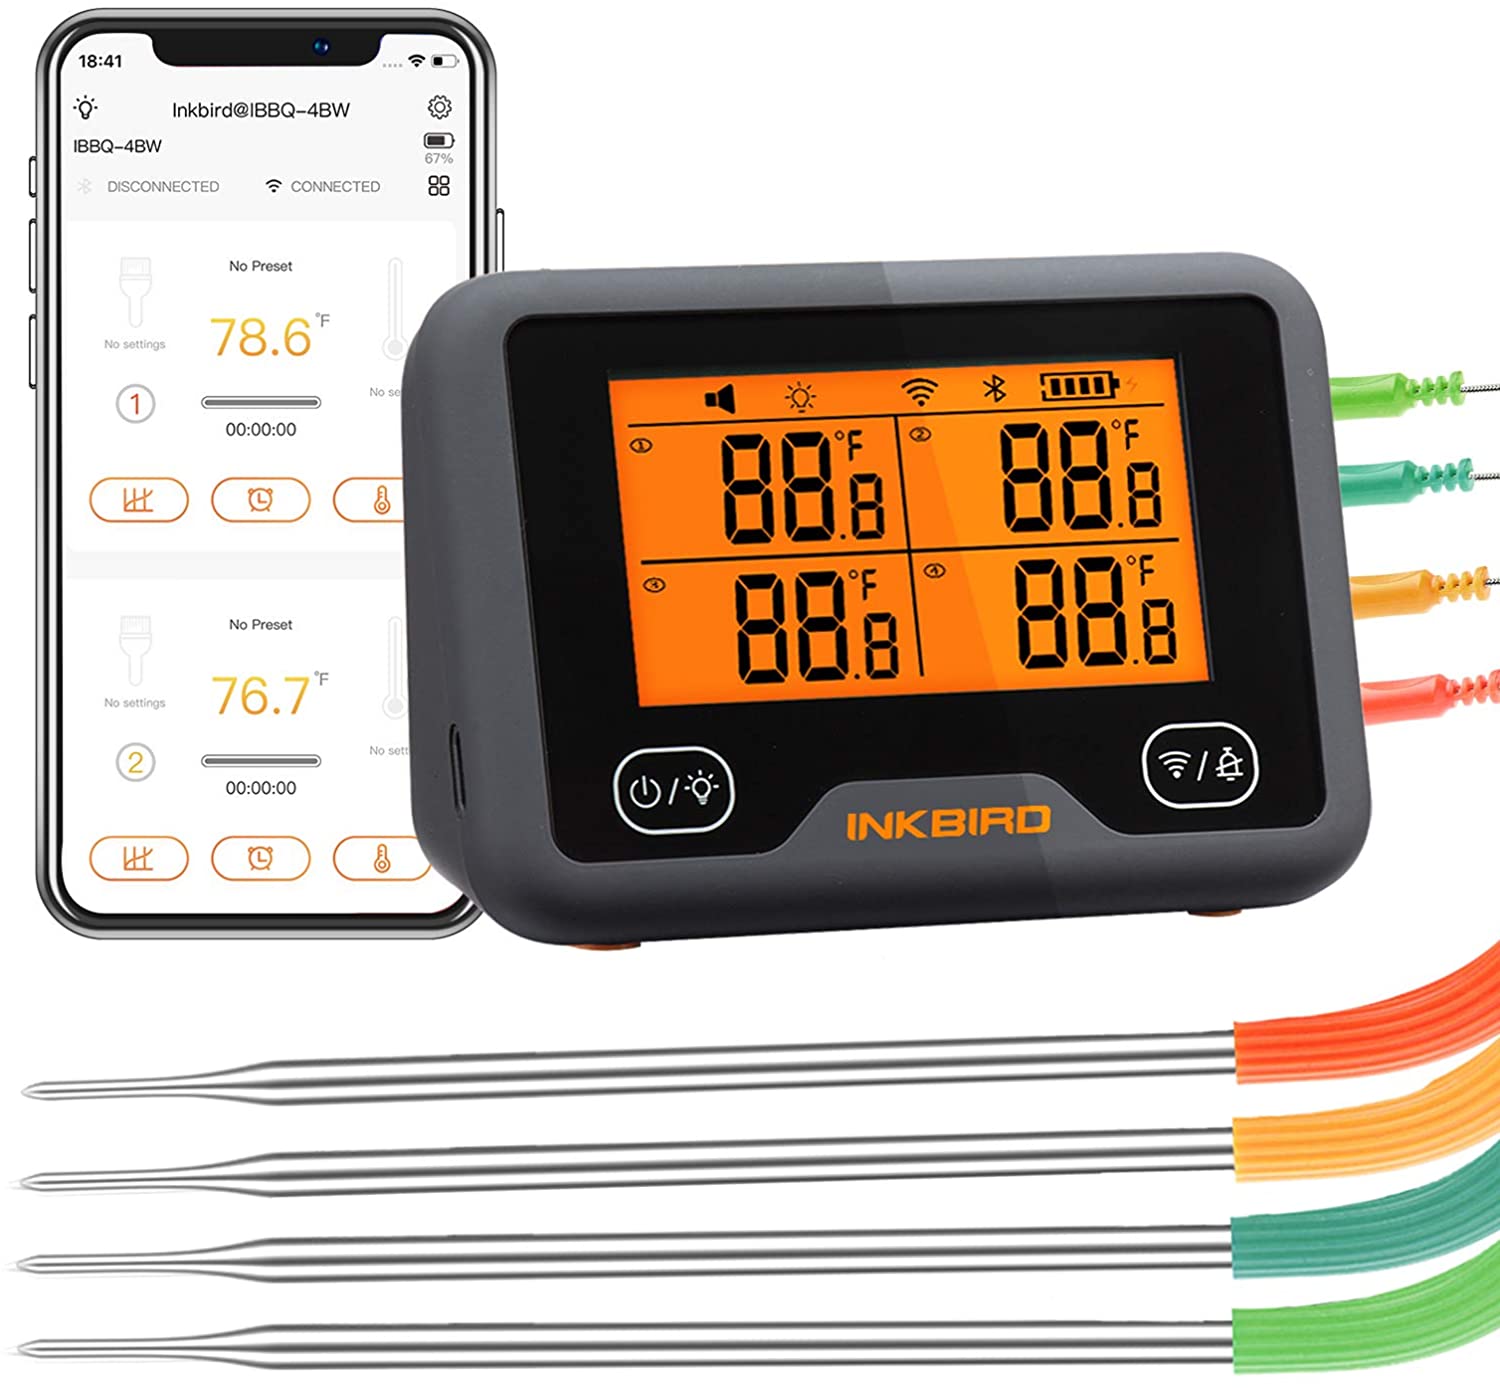 Inkbird Wi-Fi&Bluetooth Grill Thermometer IBBQ-4BW, Wireless Meat Thermometer with 4 Probes, Wifi Meat Grill Thermometer - image 1 of 7